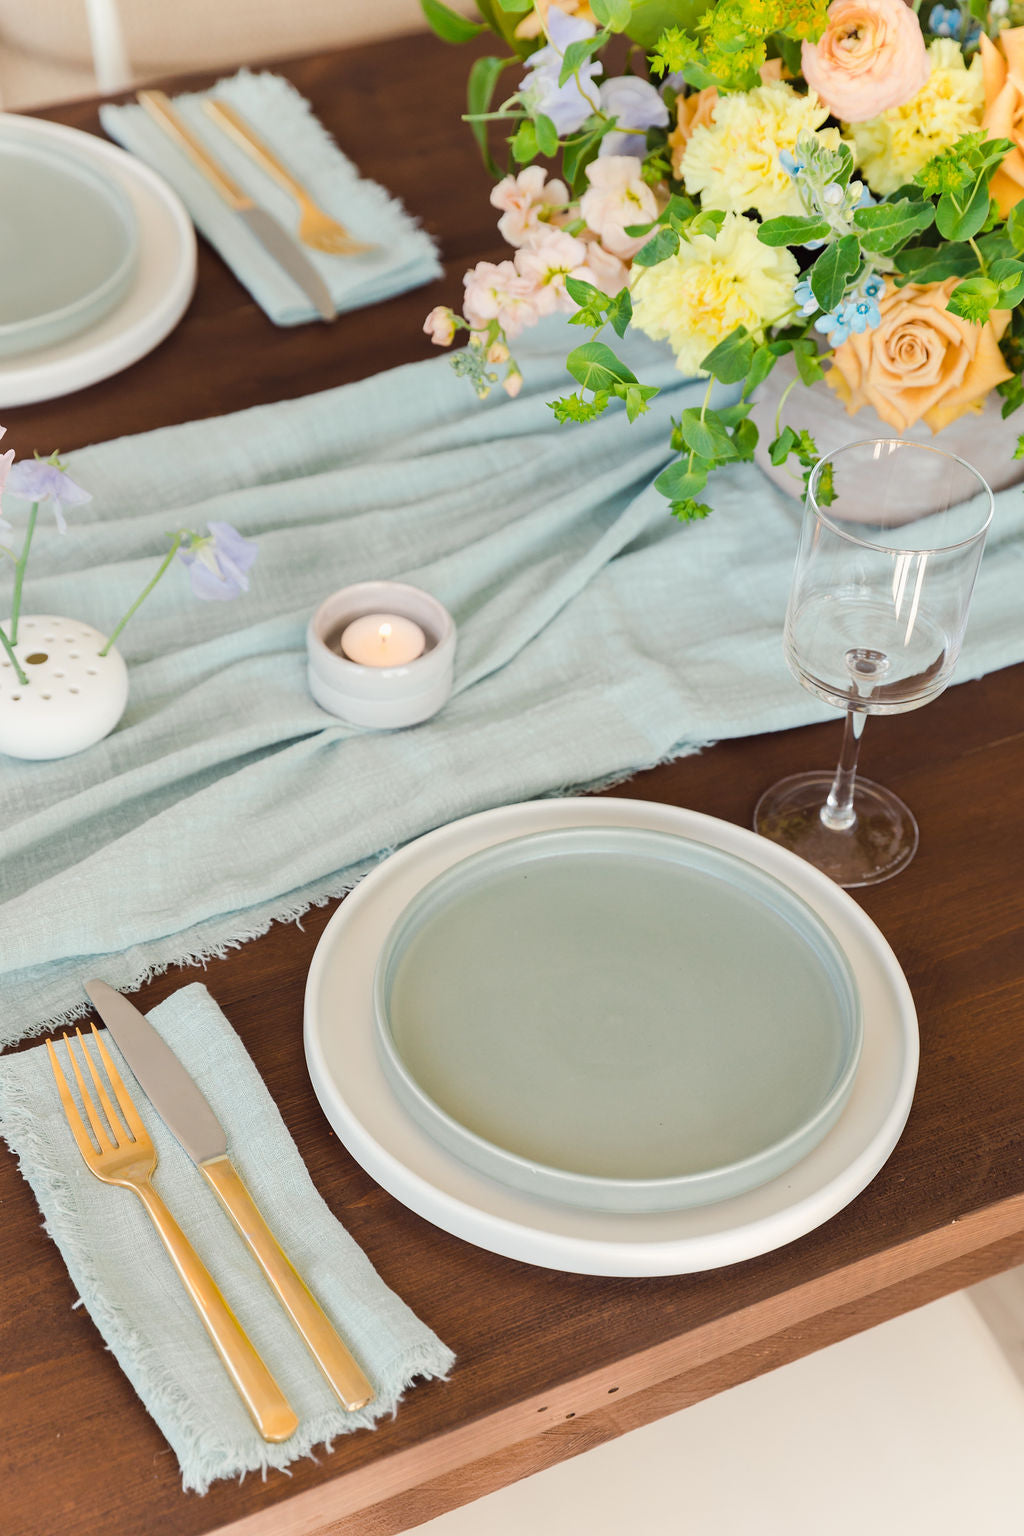 Hosting Your First Dinner Party? Here’s What You Need to Know - Bluum Maison